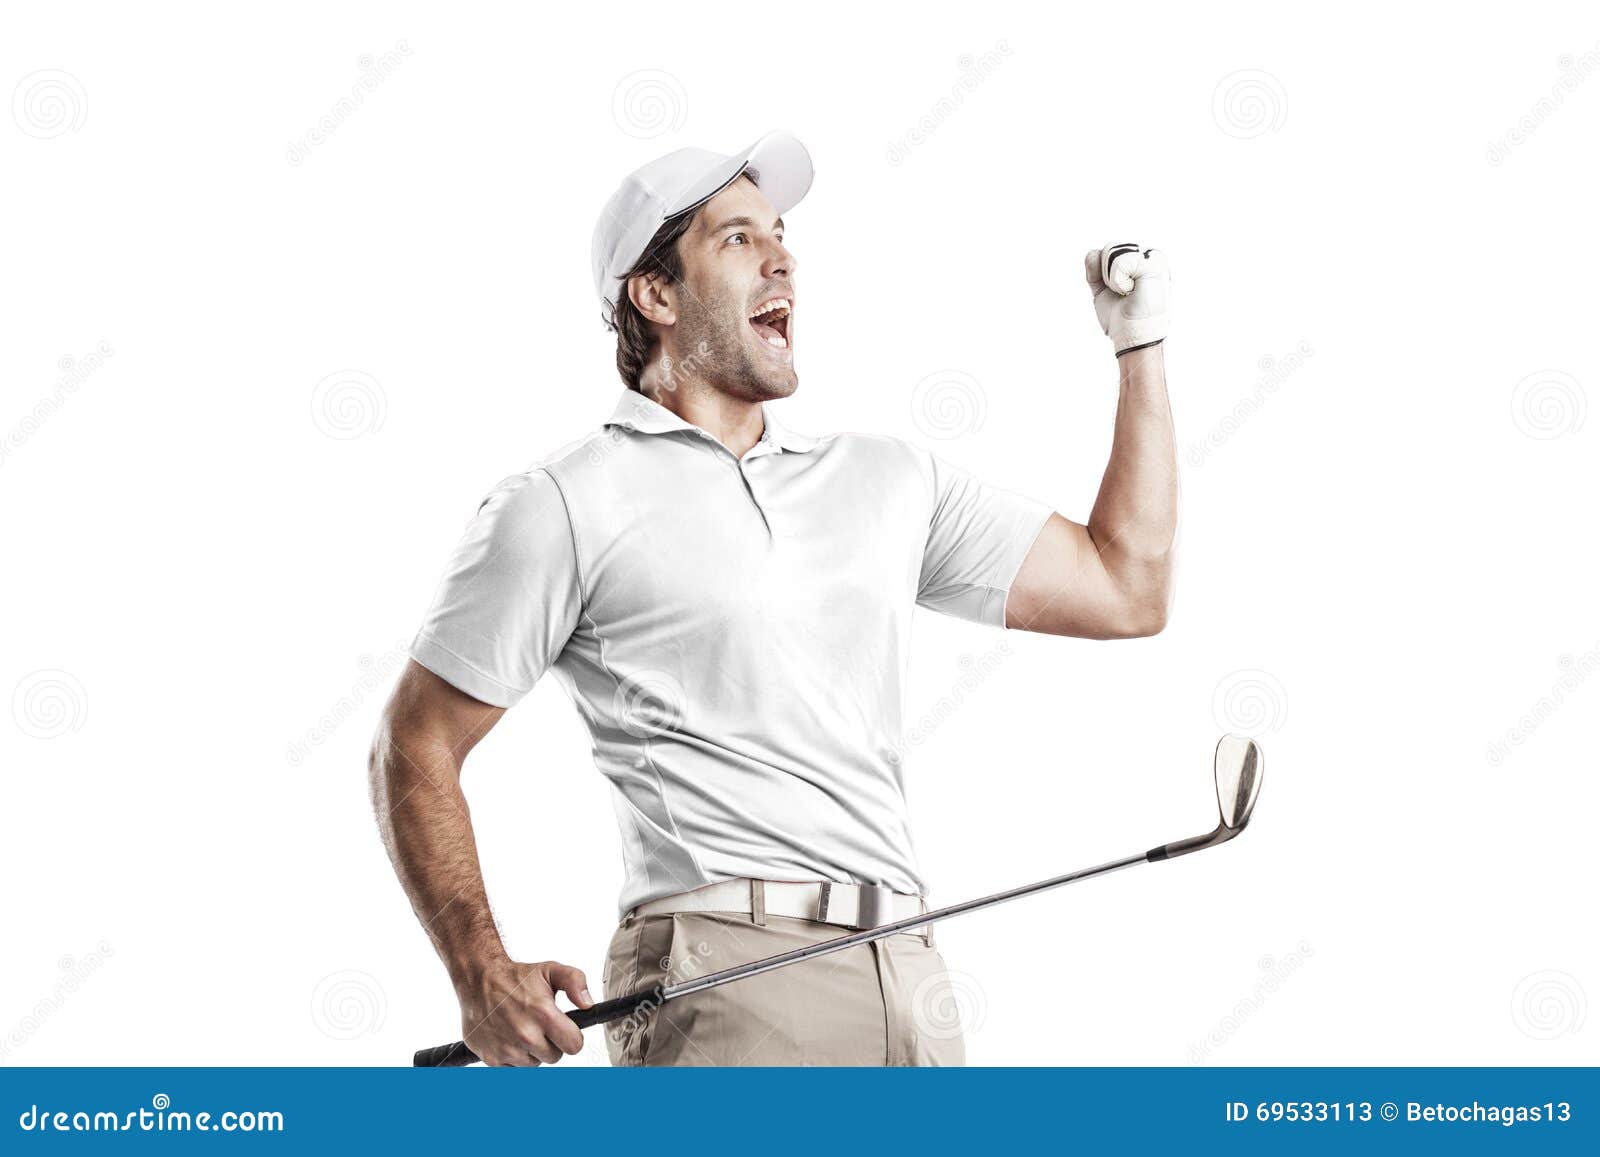 Golf Player stock image. Image of golf, golfer, people - 69533113